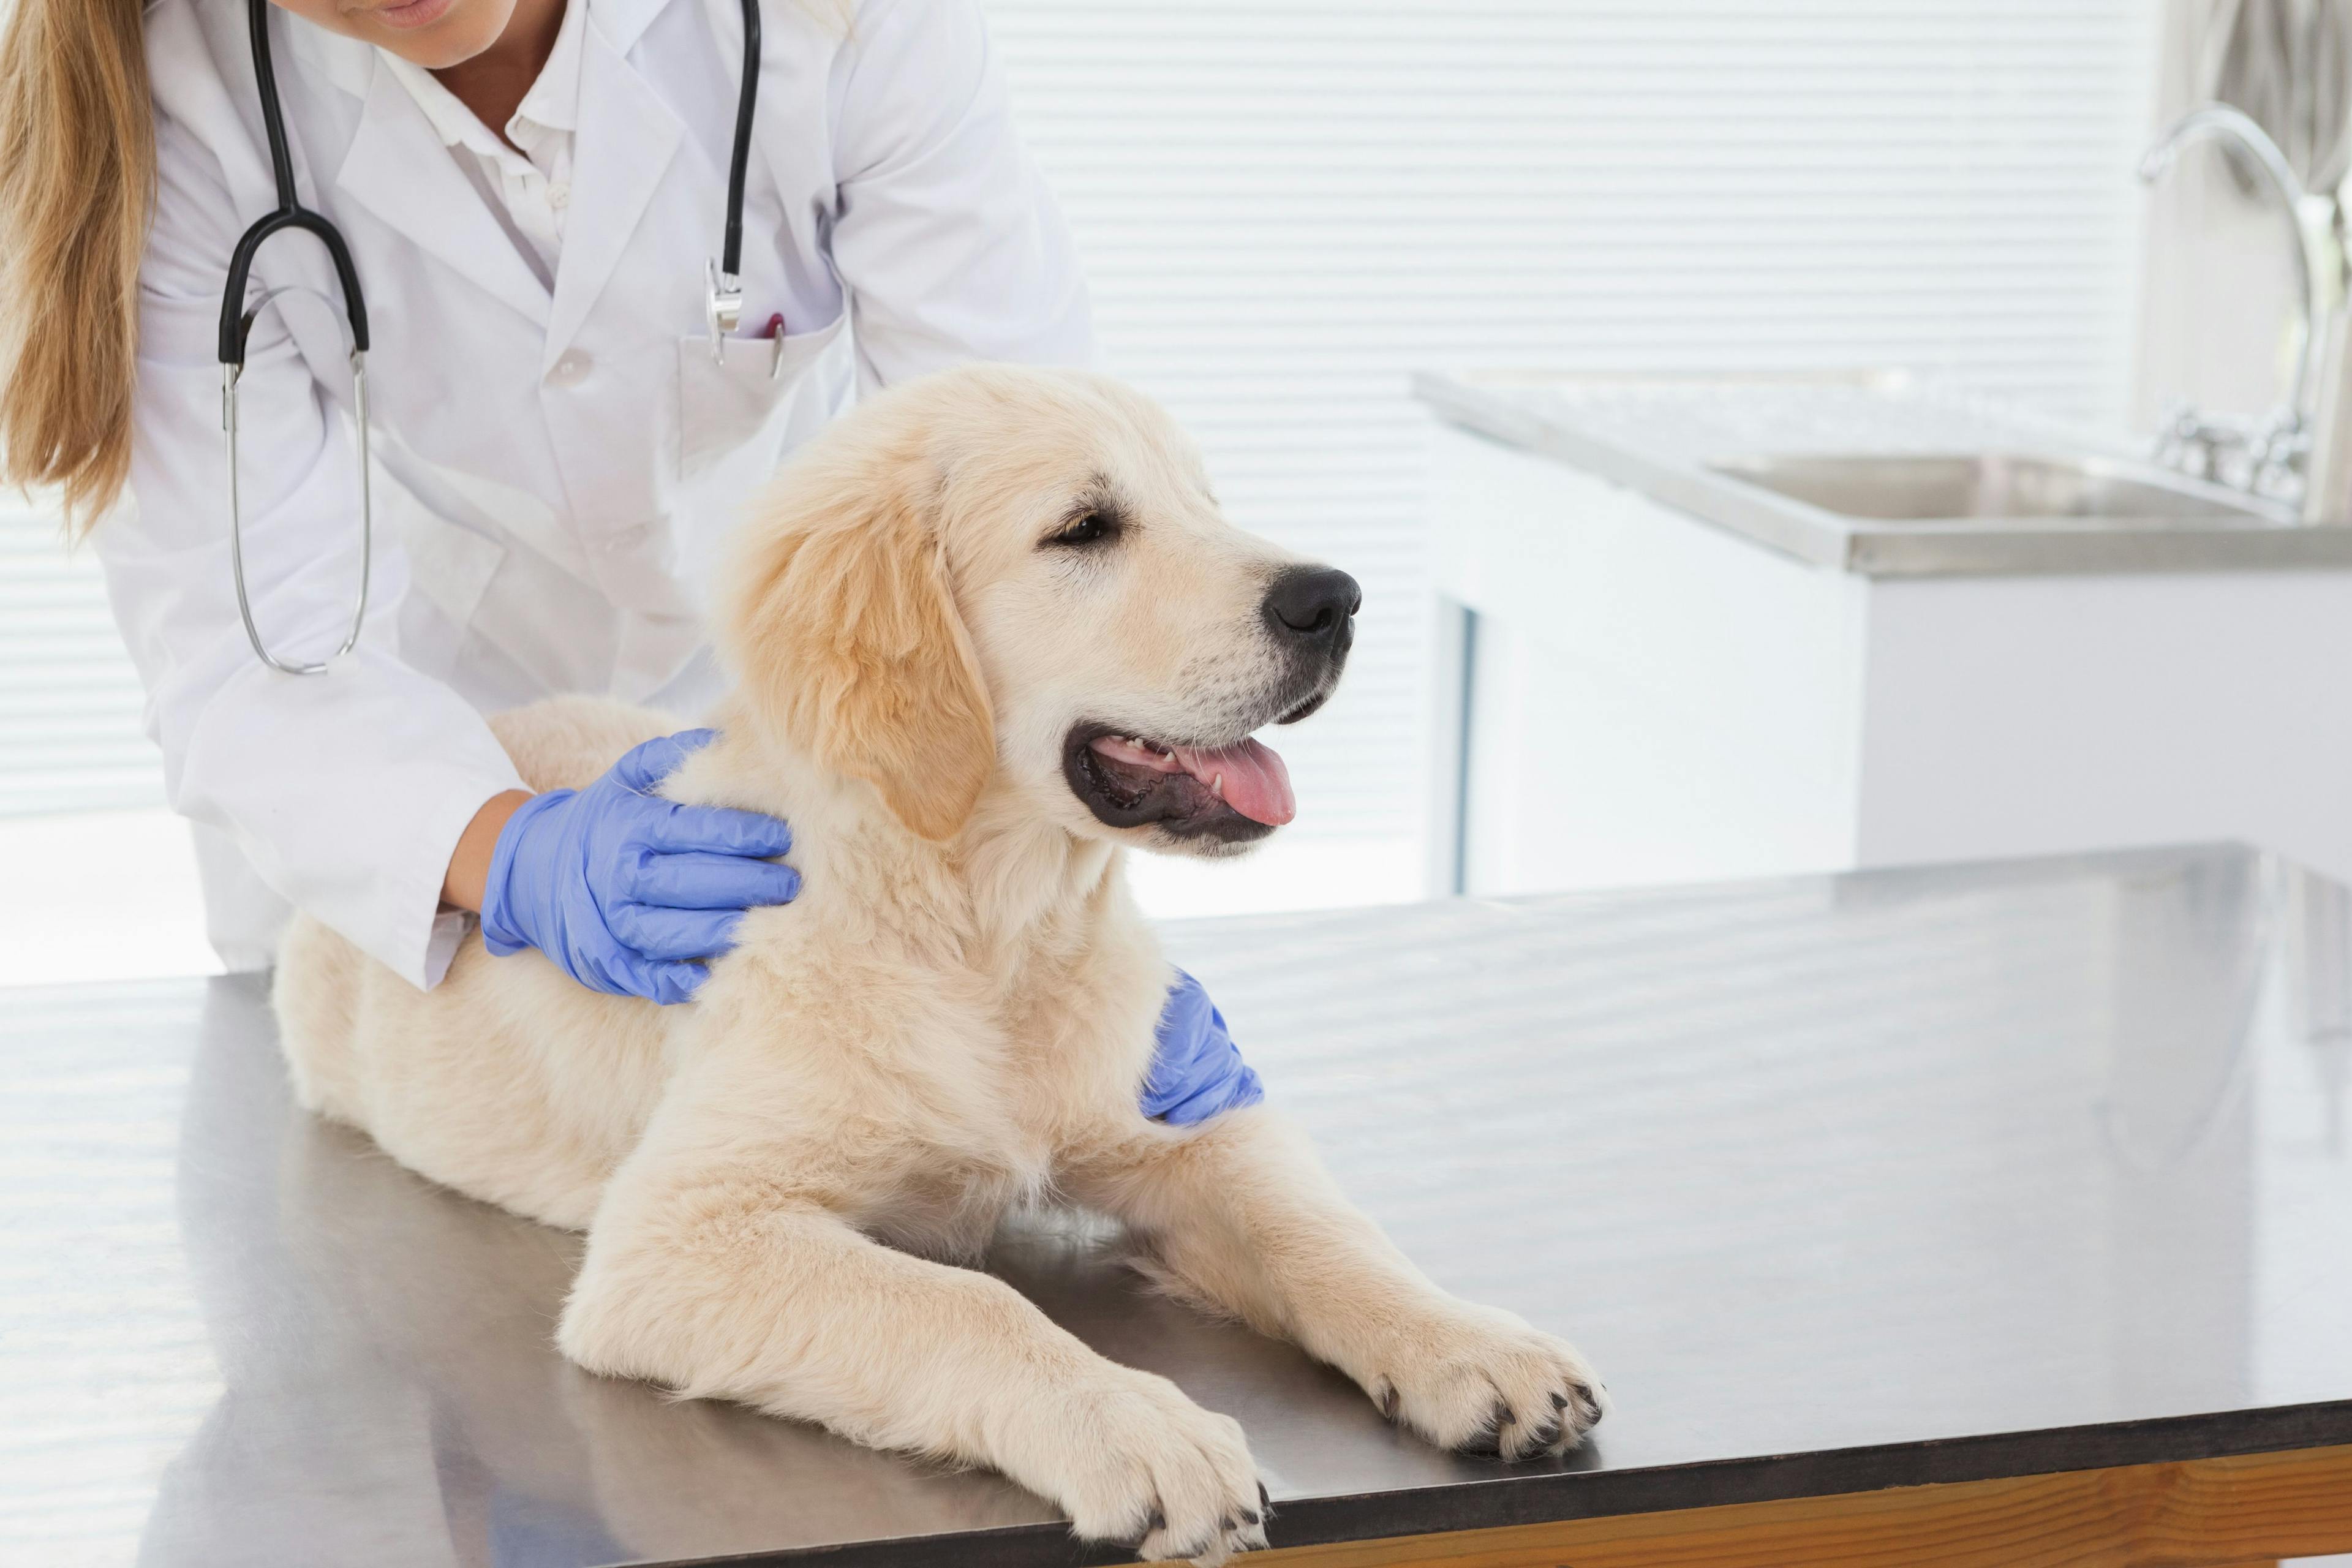 Veterinary Anesthesia Nerds cover common drug myths  